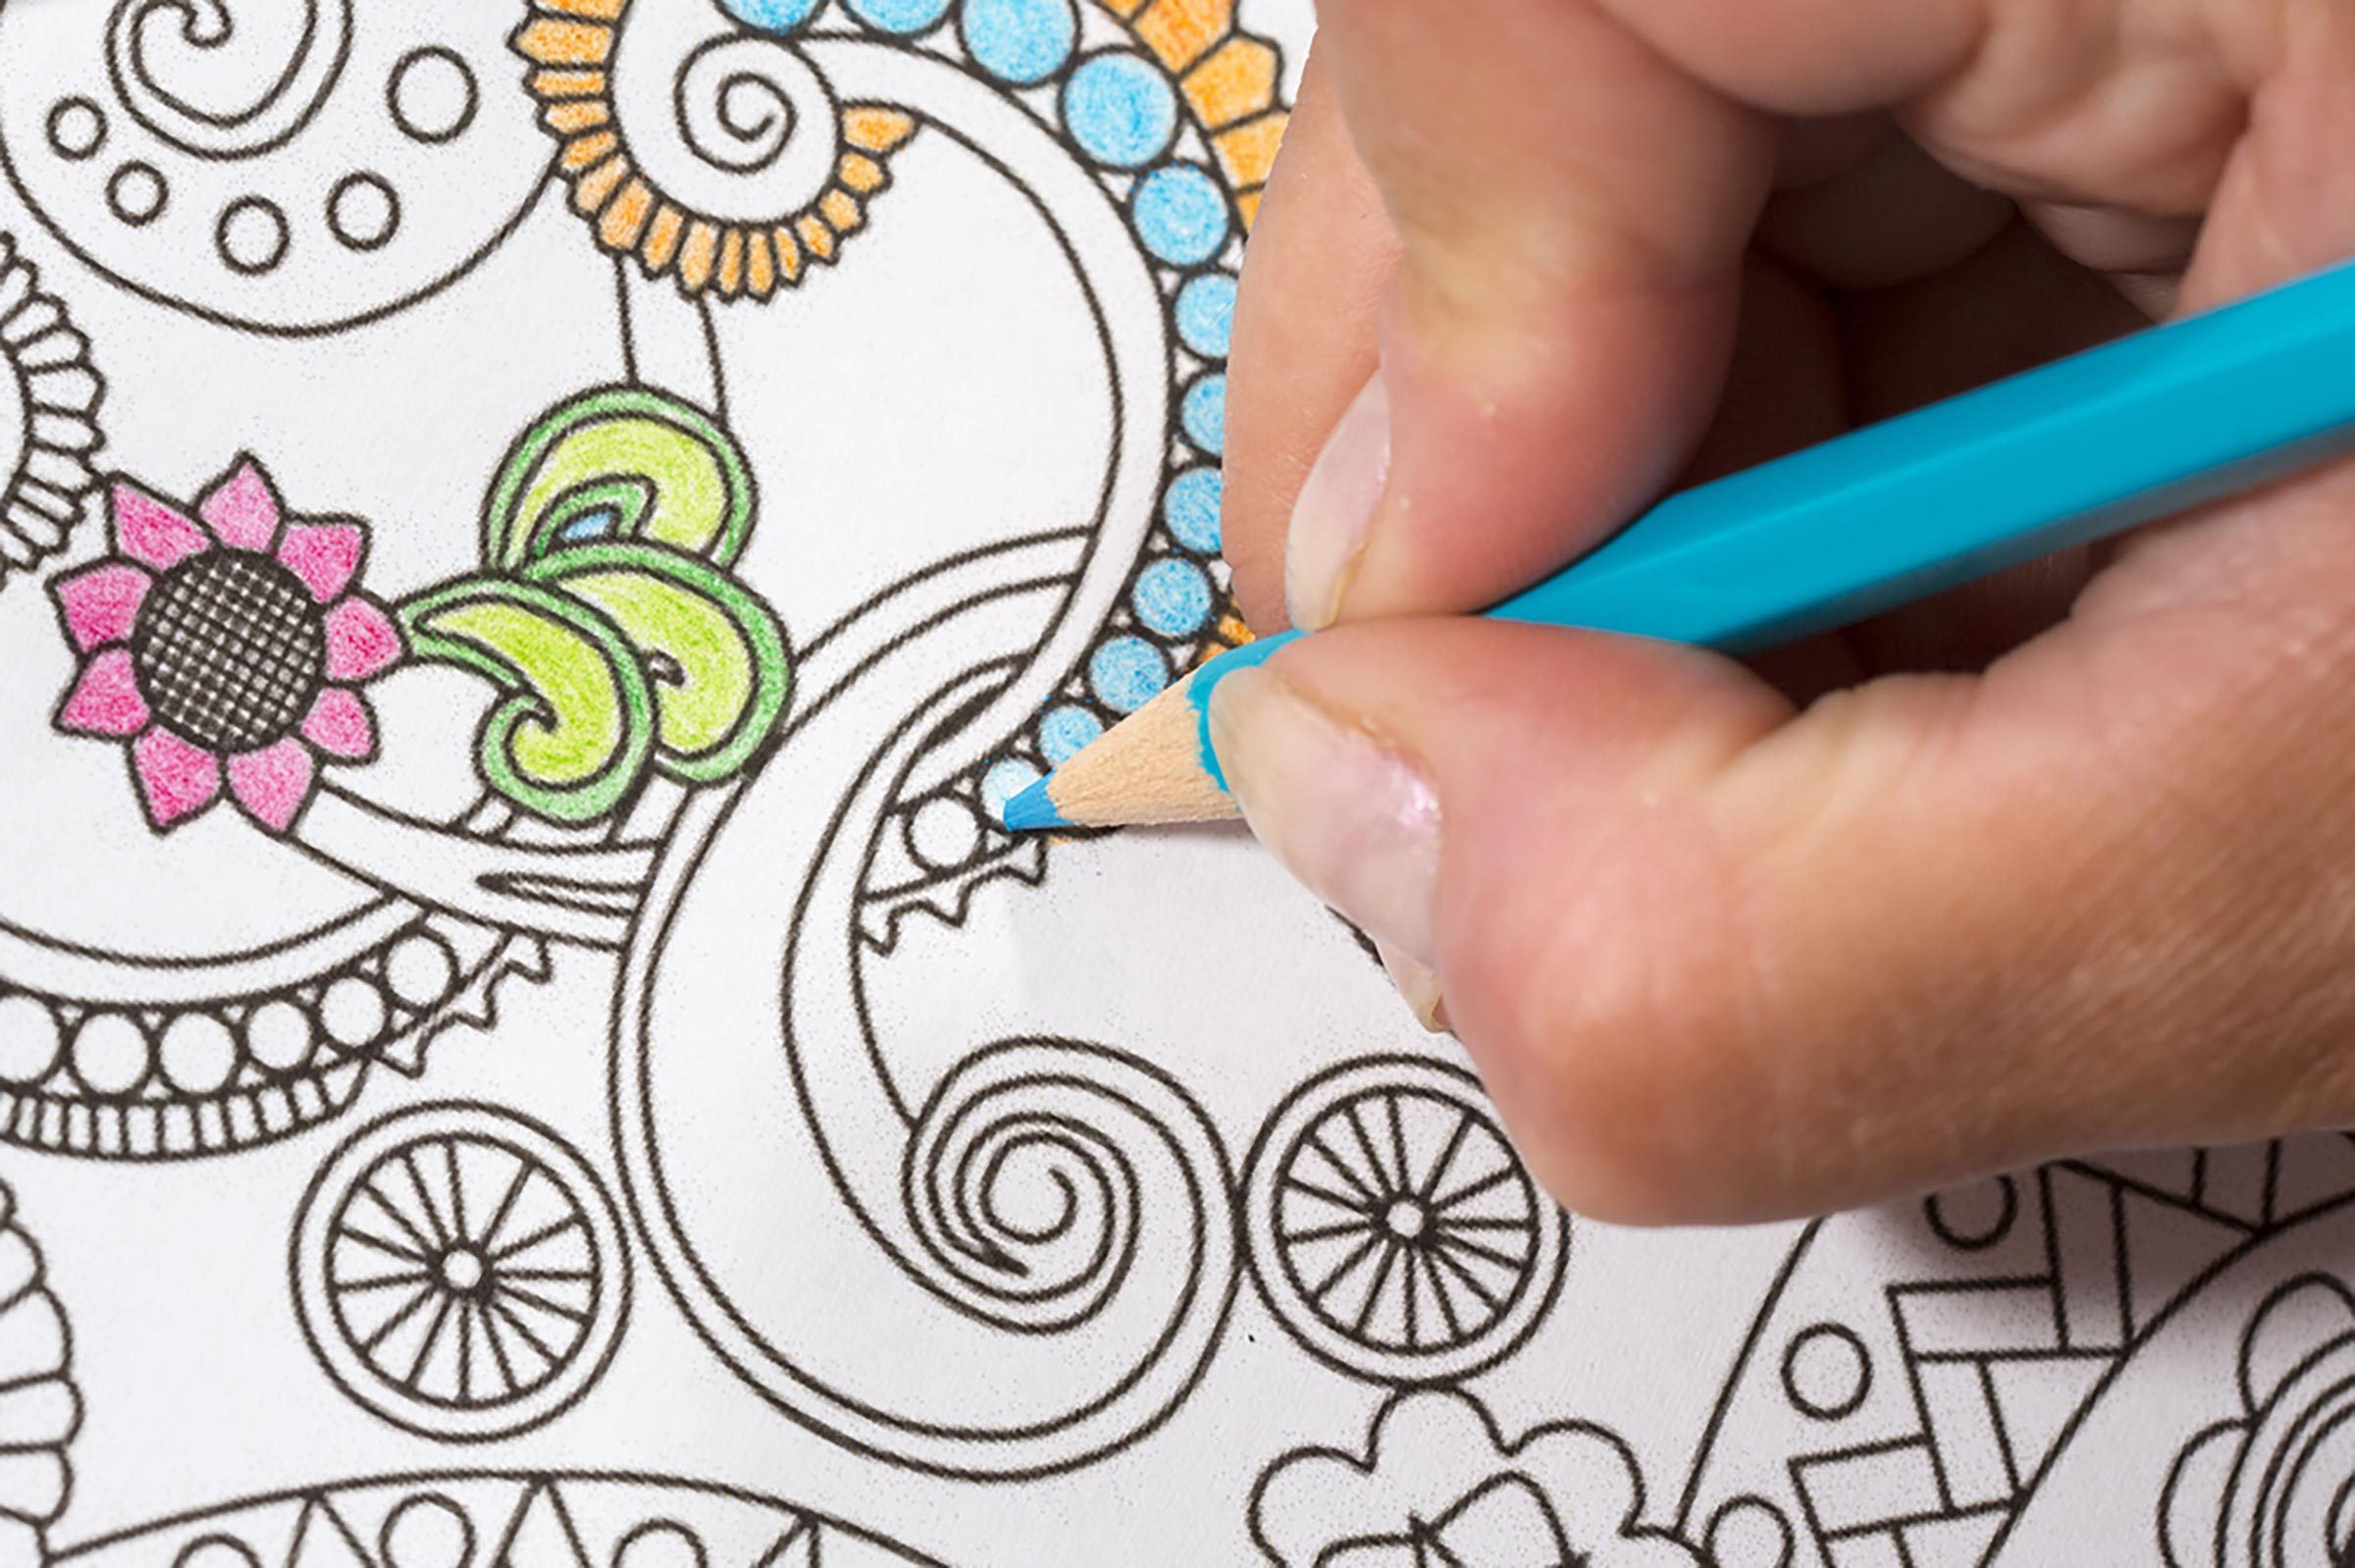 Types of adult coloring books - Art Therapy Coloring